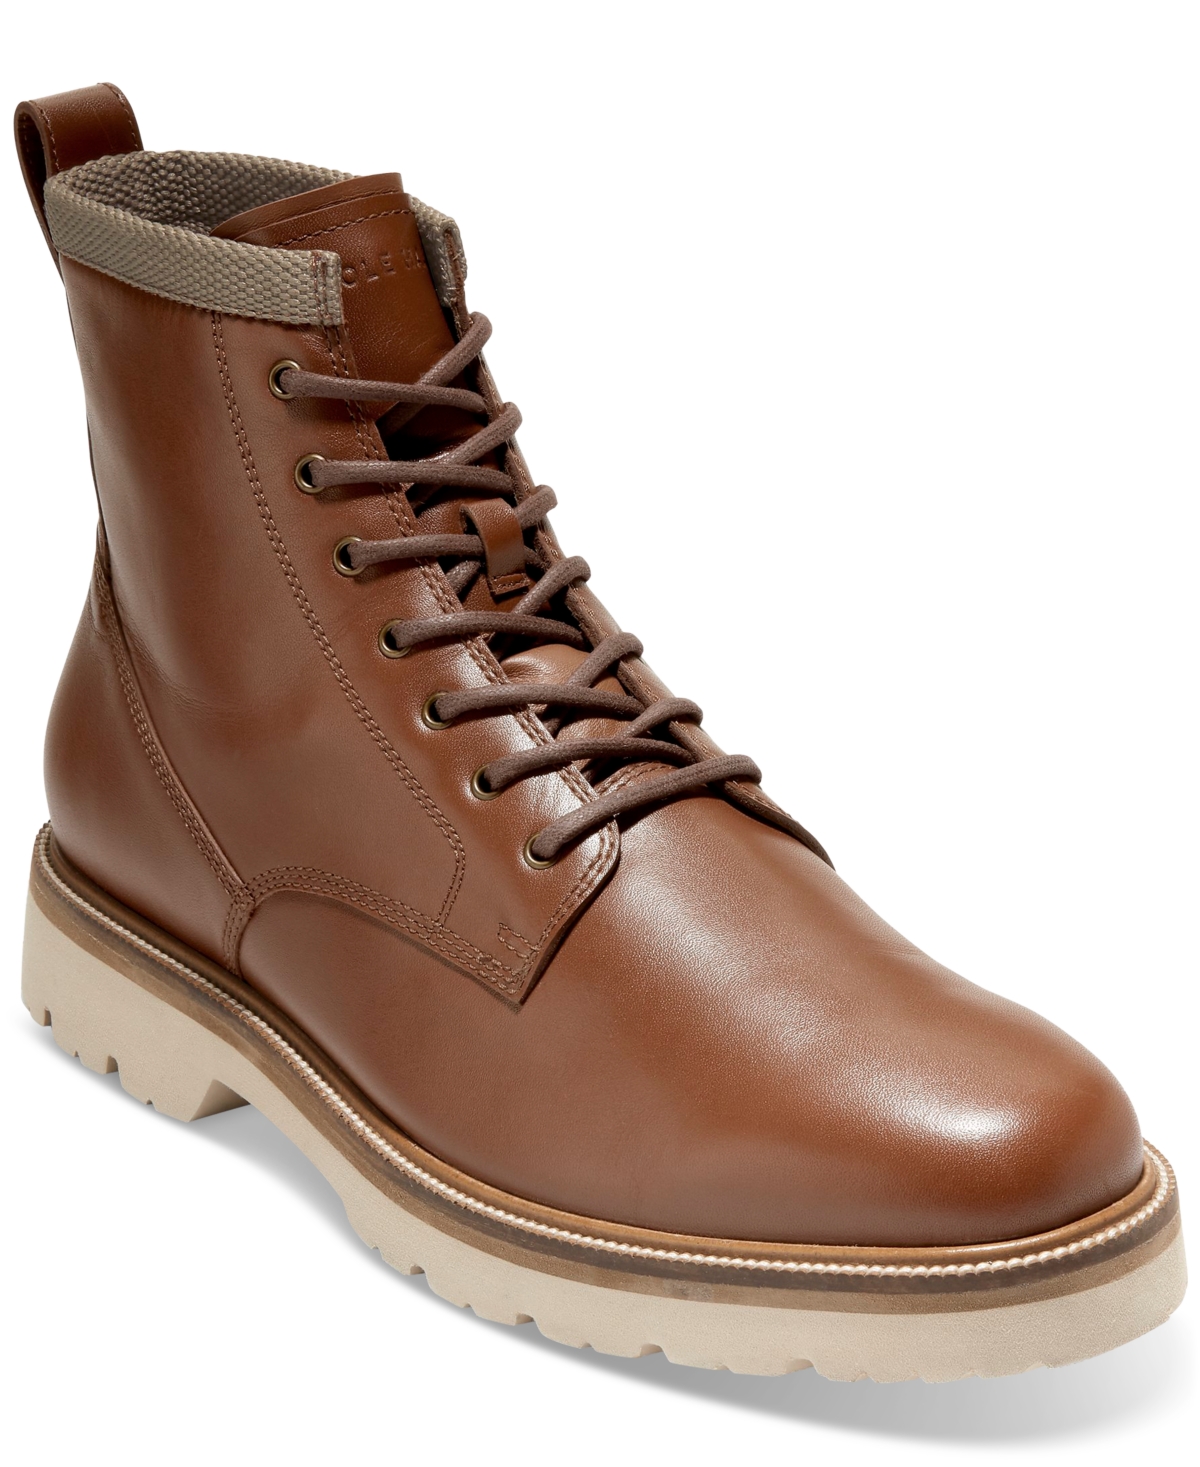 Cole Haan American Classics Waterproof Boots In Ch Mesquite,ch Oat Wp